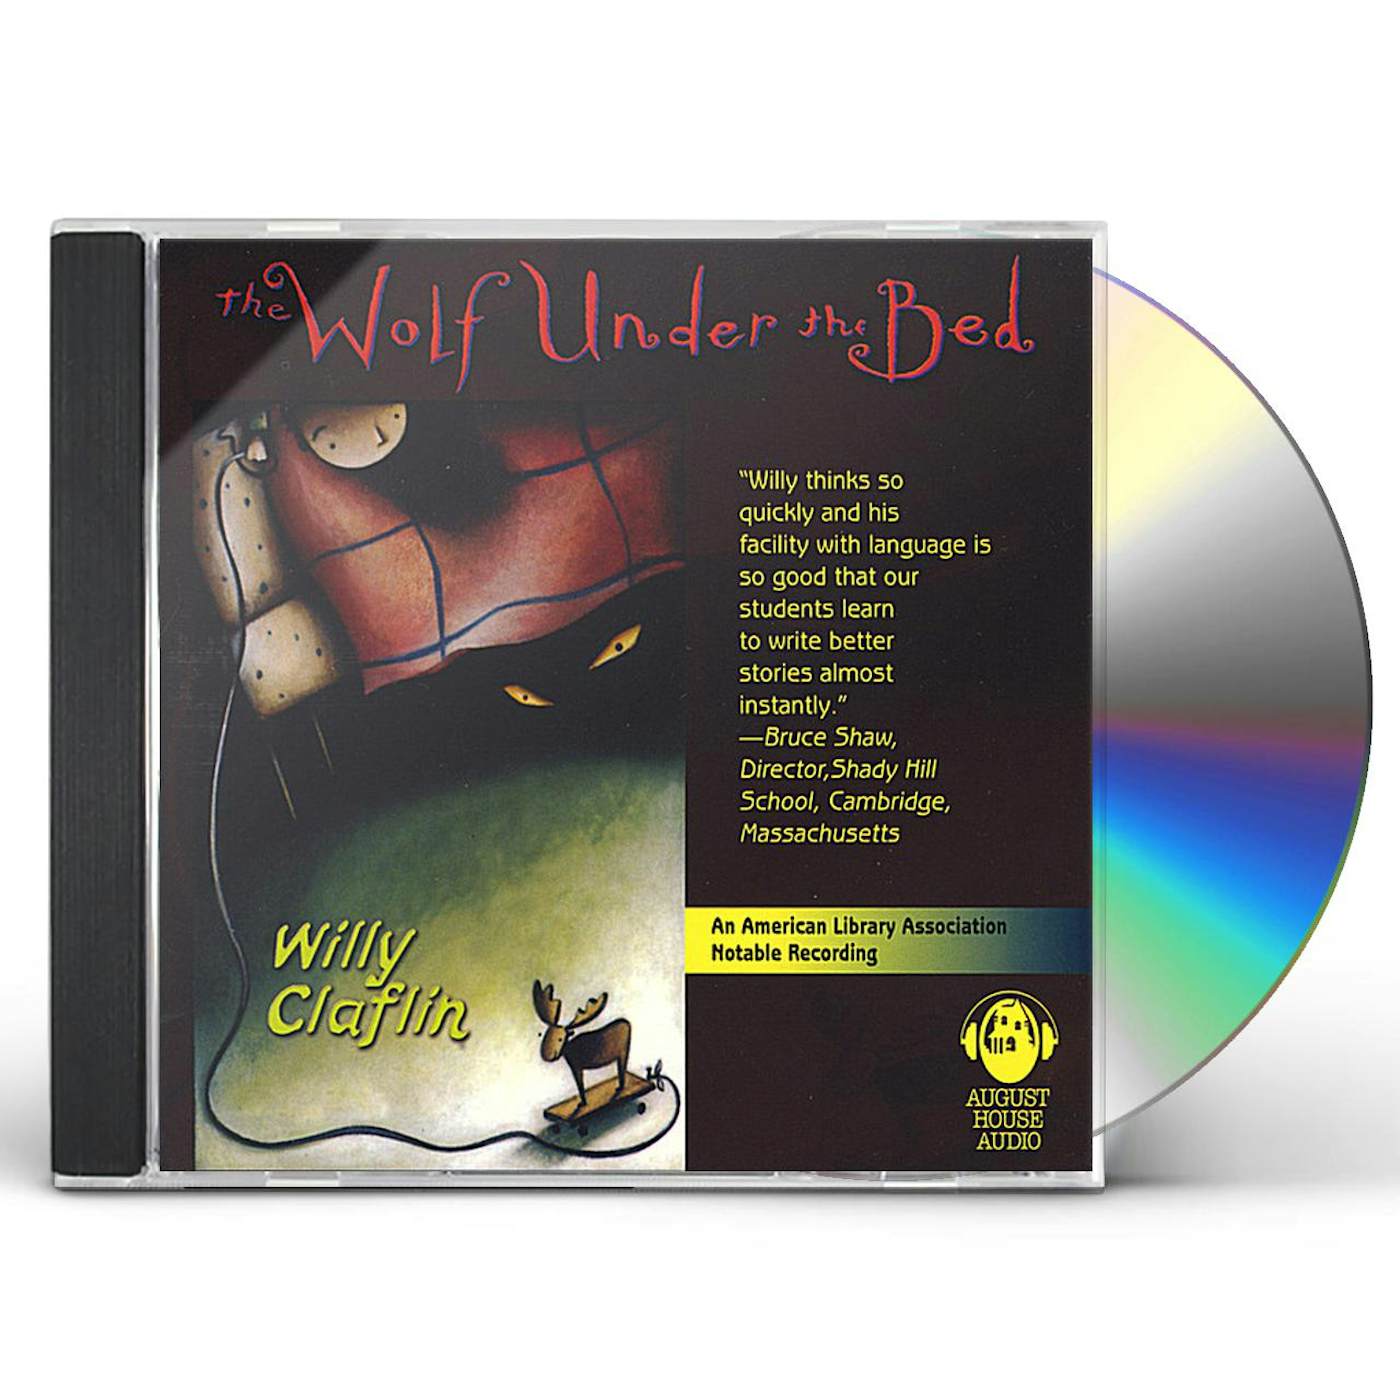 Willy Claflin WOLF UNDER THE BED CD